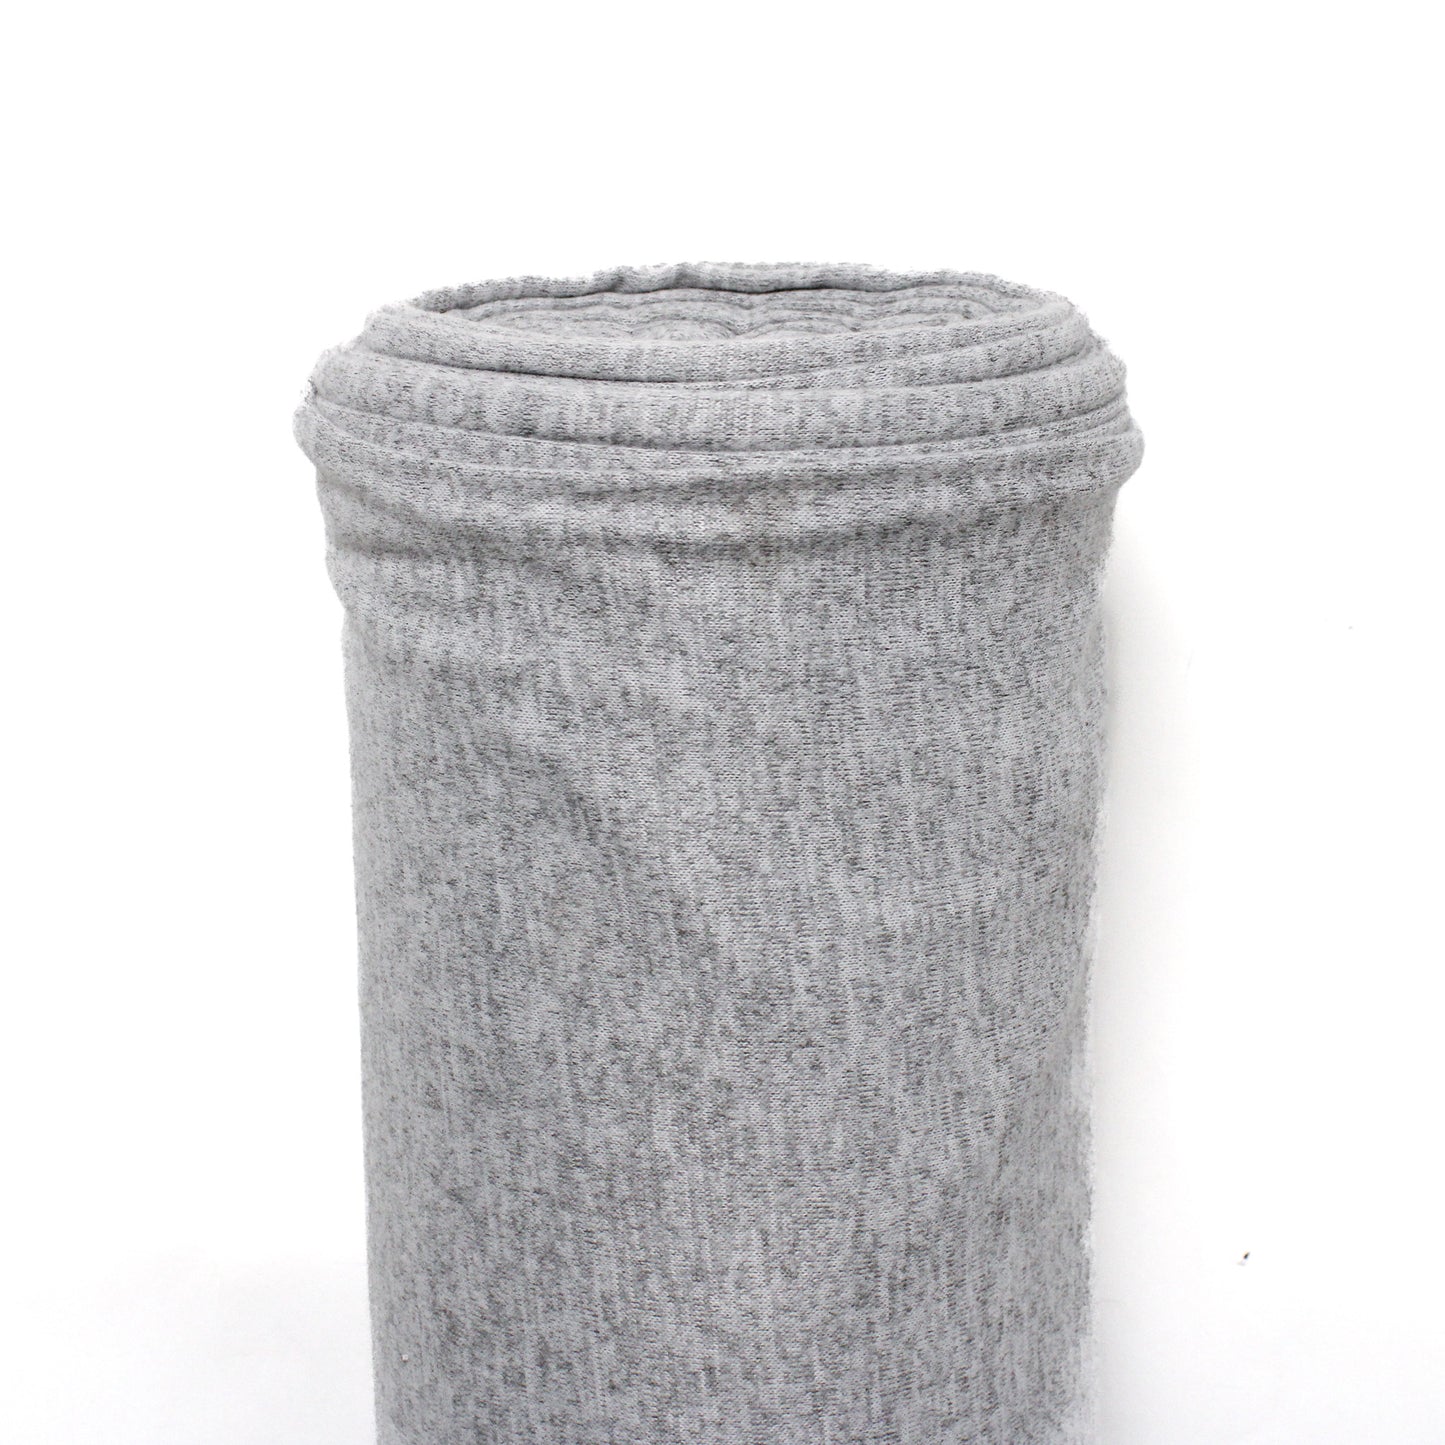 WHOLESALE ROLL - BRUSHED STONE GREY JERSEY